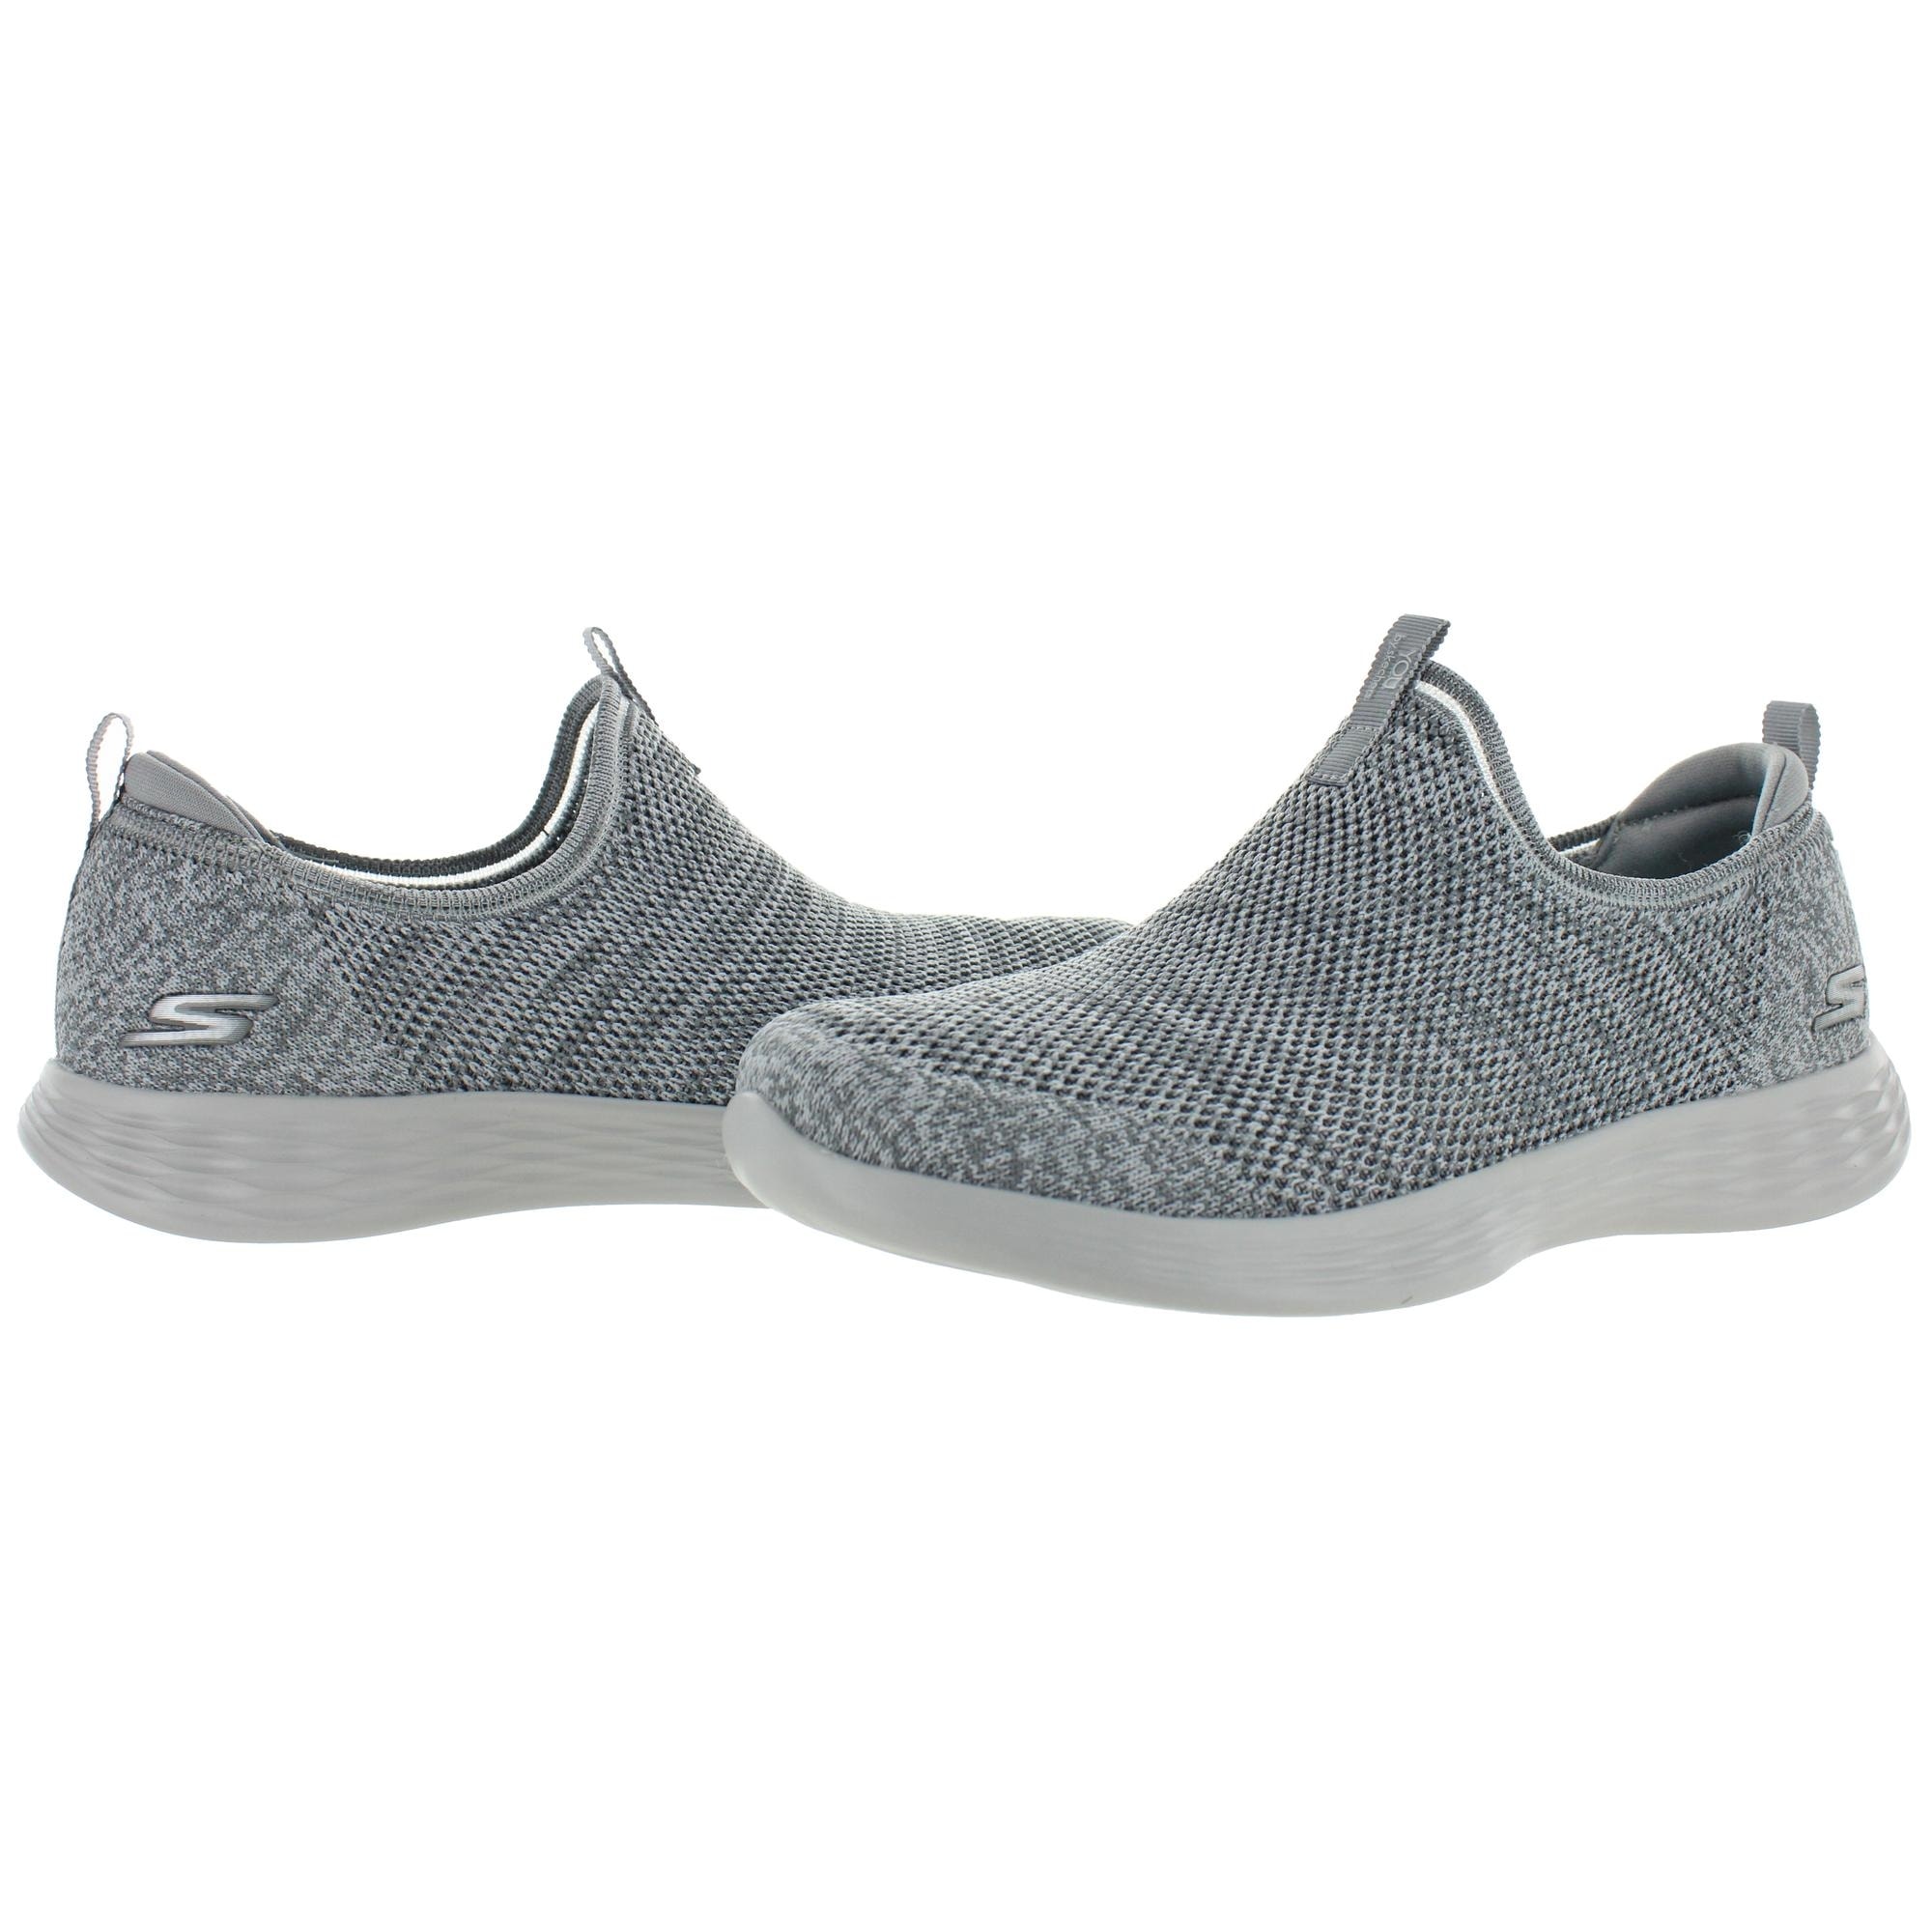 skechers you knit slip on shoes